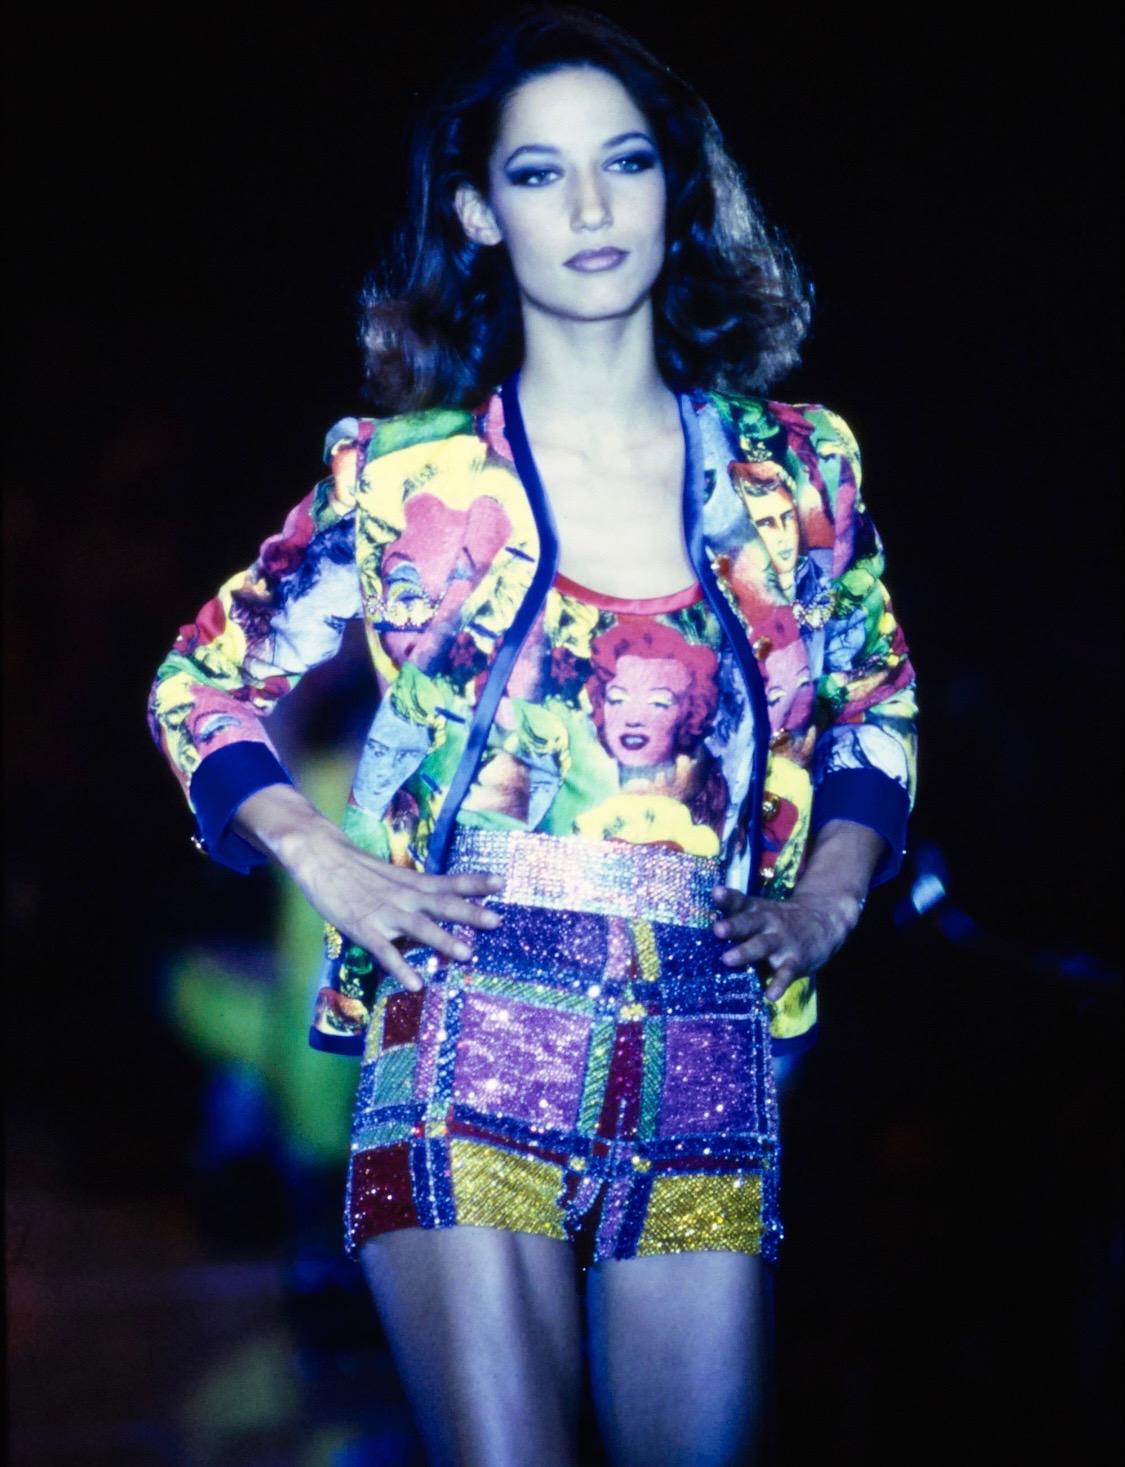 Presenting a Marilyn Monroe and James Dean pop art Gianni Versace Couture shirt and shorts set, designed by Gianni Versace. From Spring/Summer 1991, this collection was heavily influenced by Warhol’s use of iconography from American popular culture.